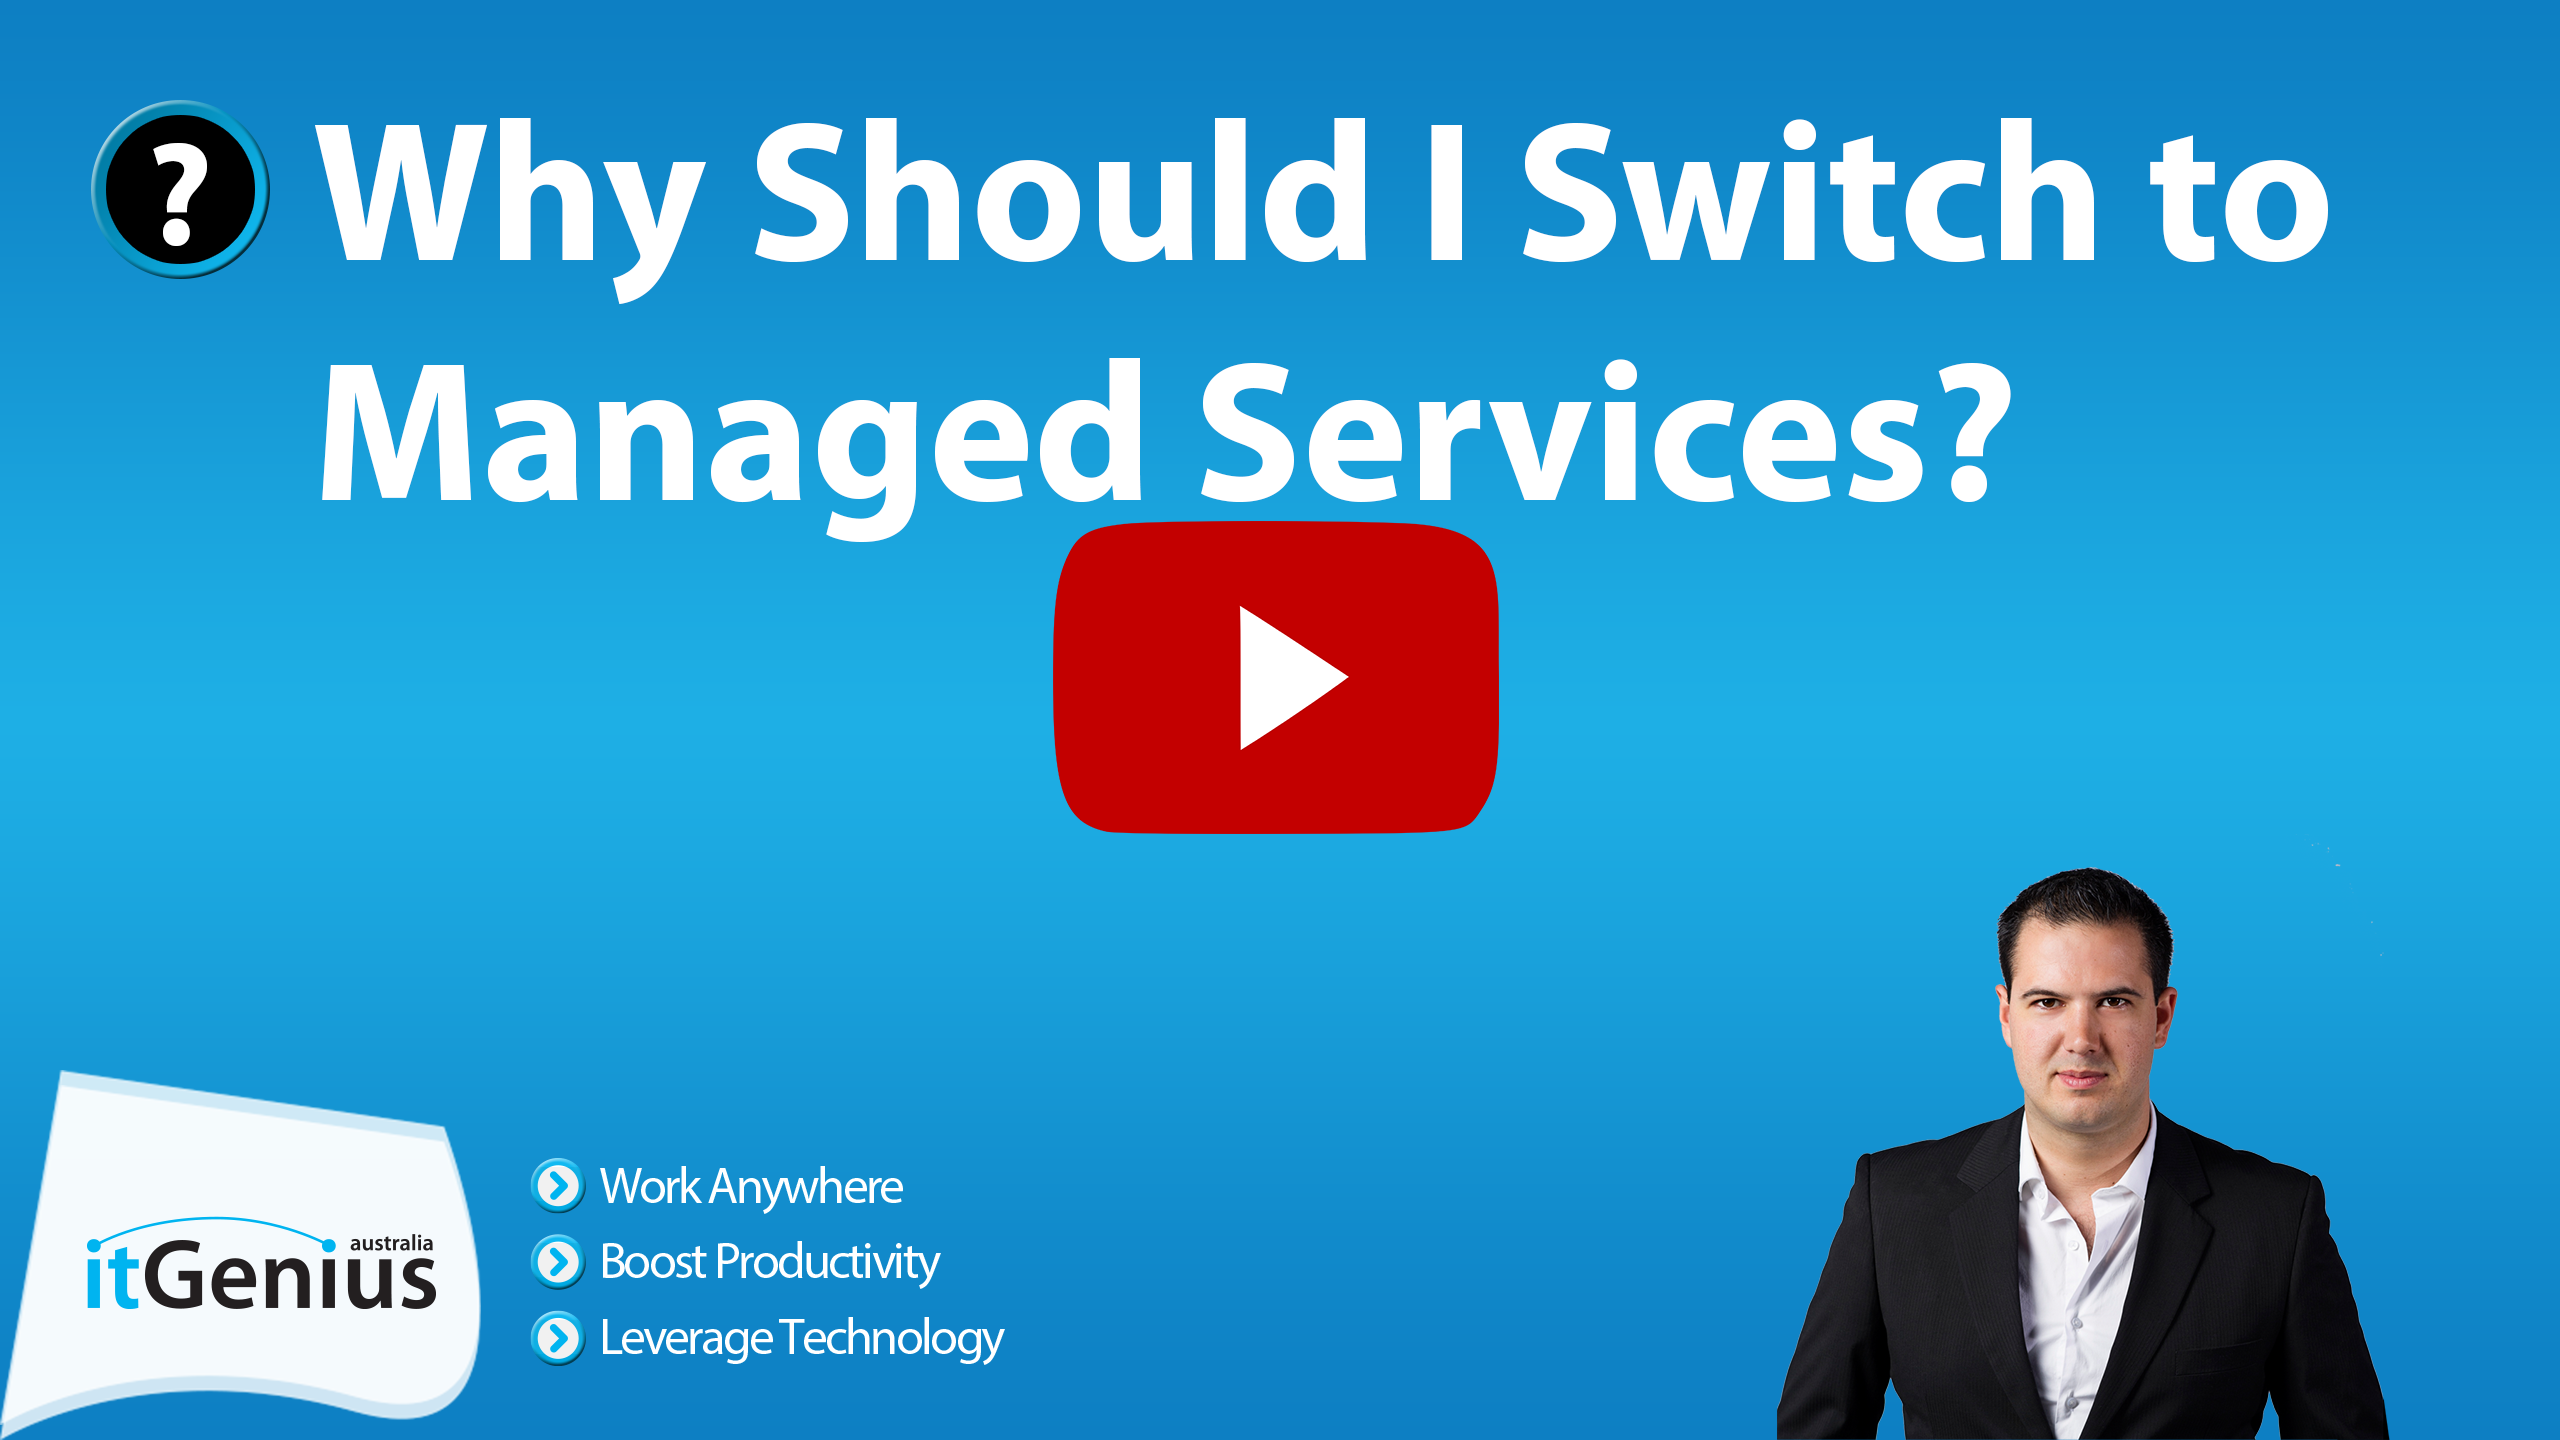 Why Should I Switch to Managed Services?